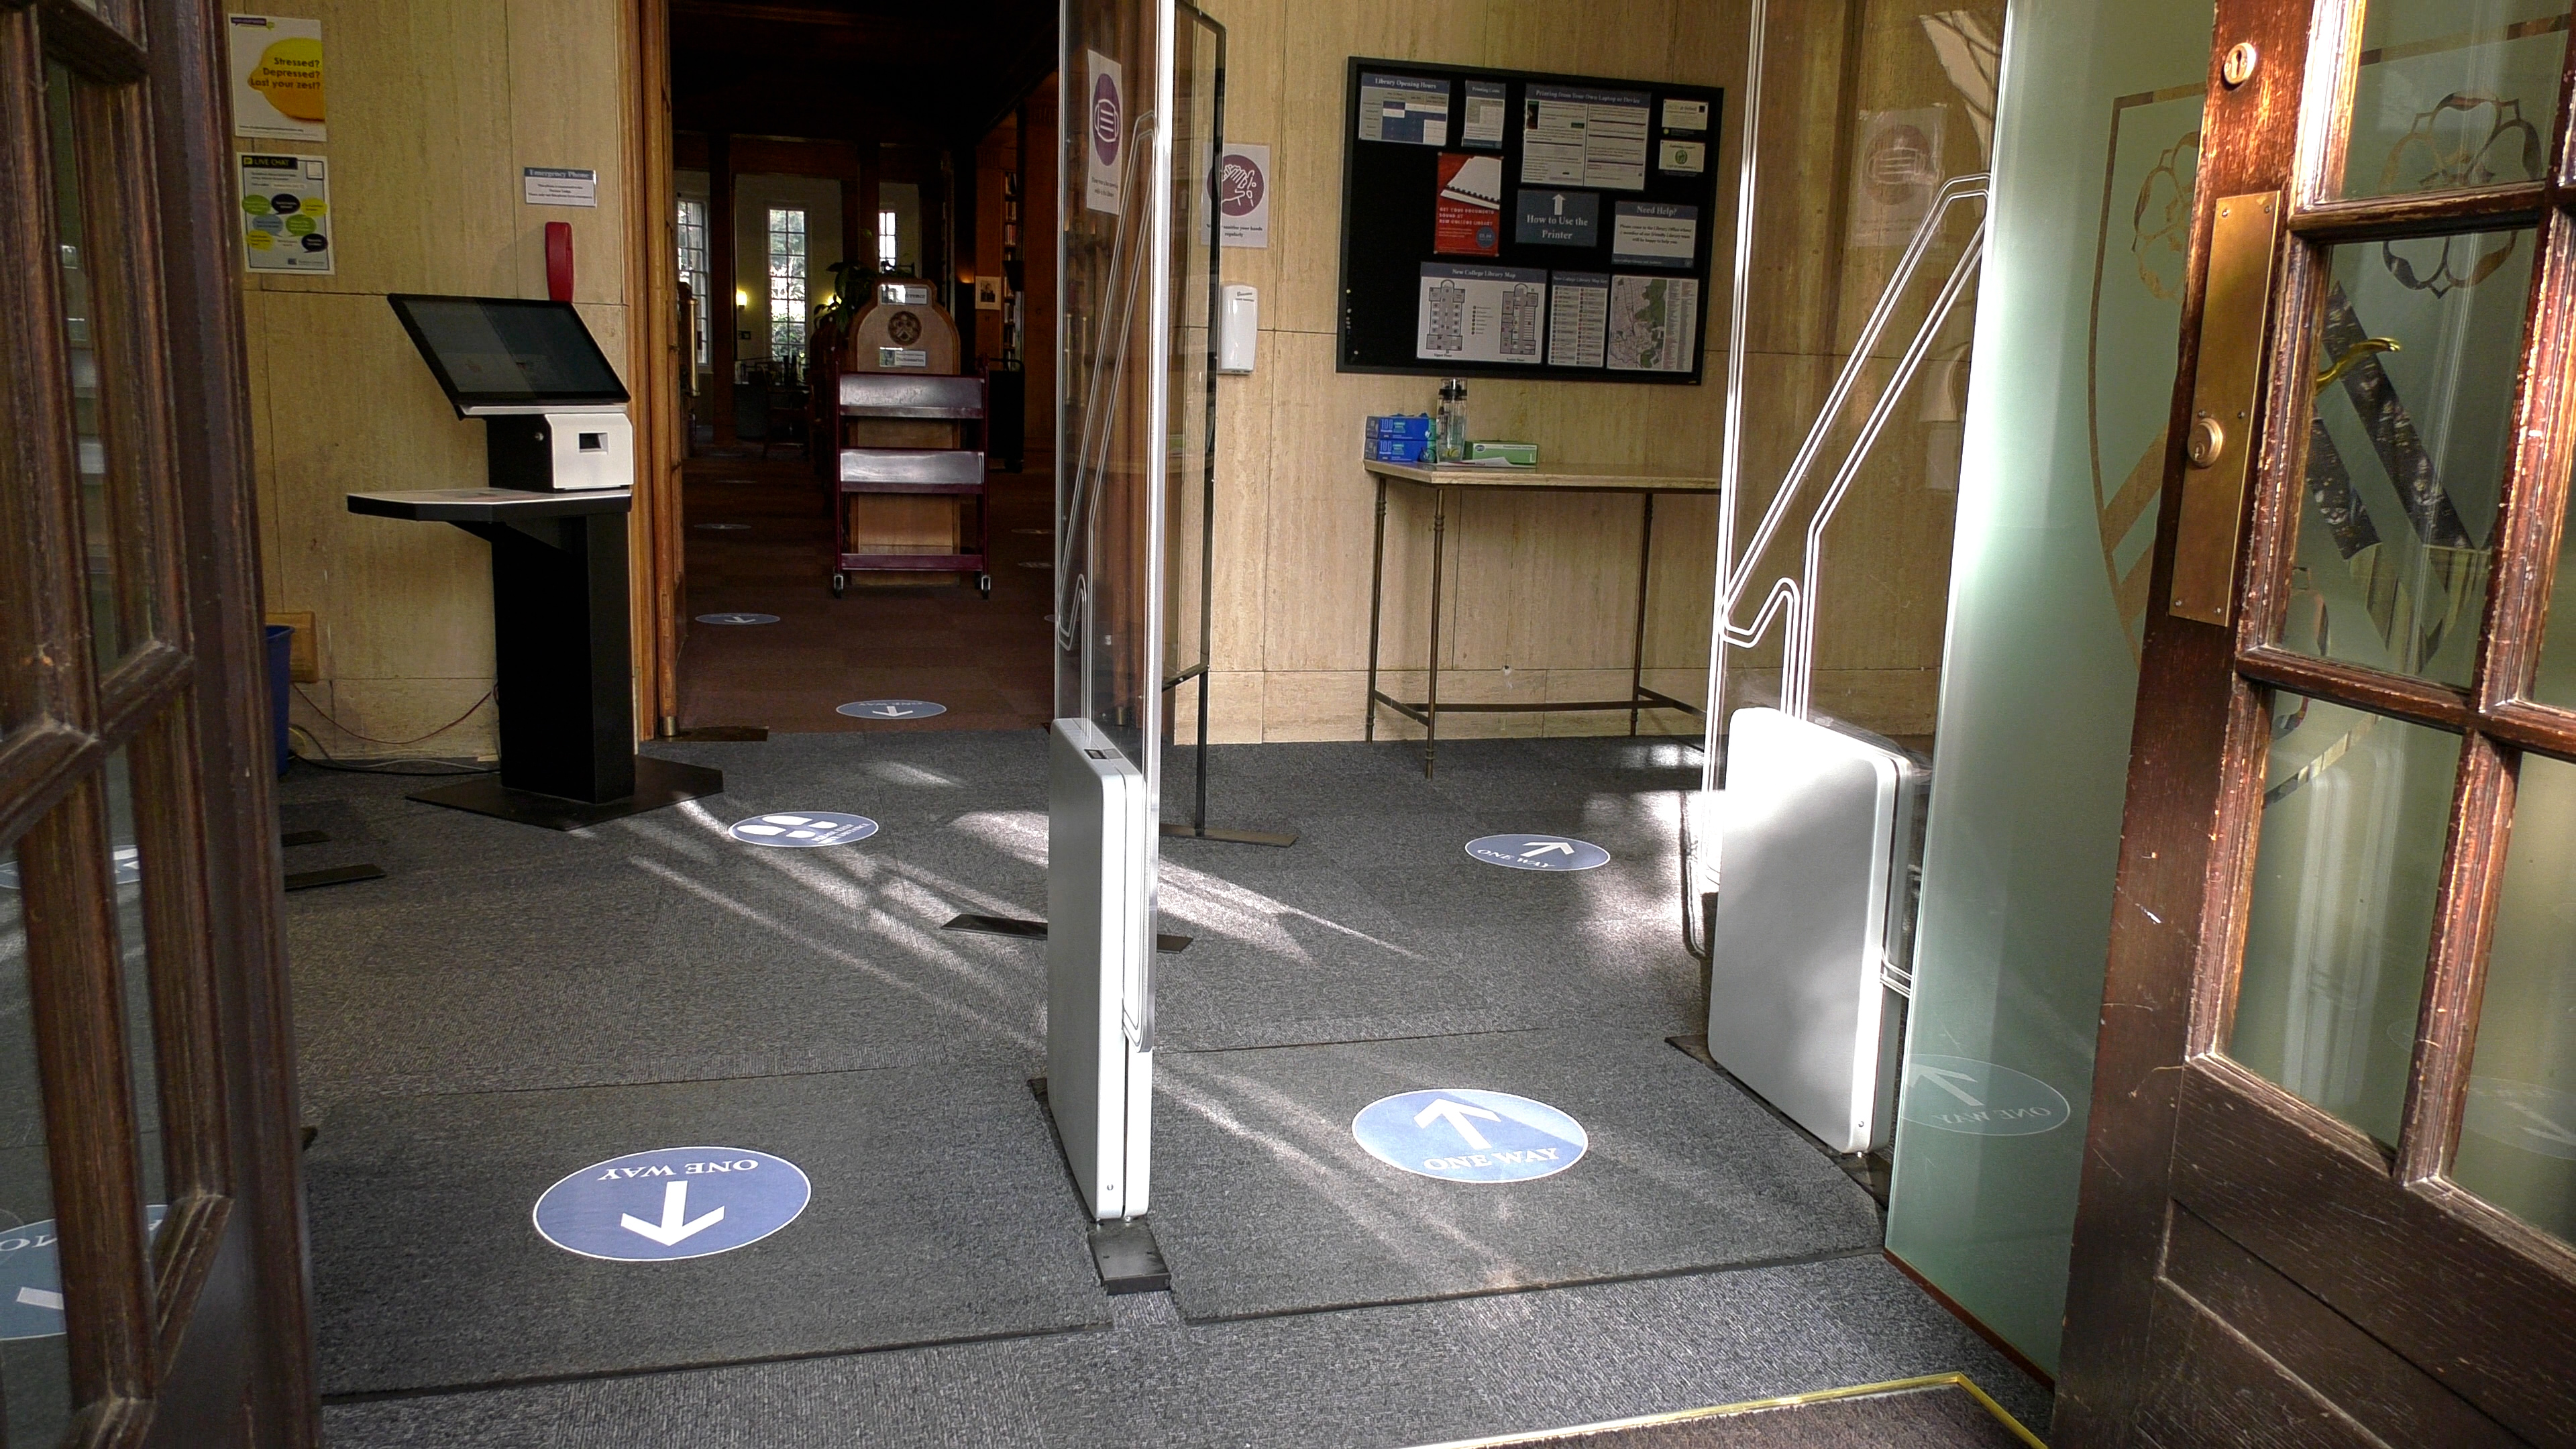 Library entrance showing one-way system